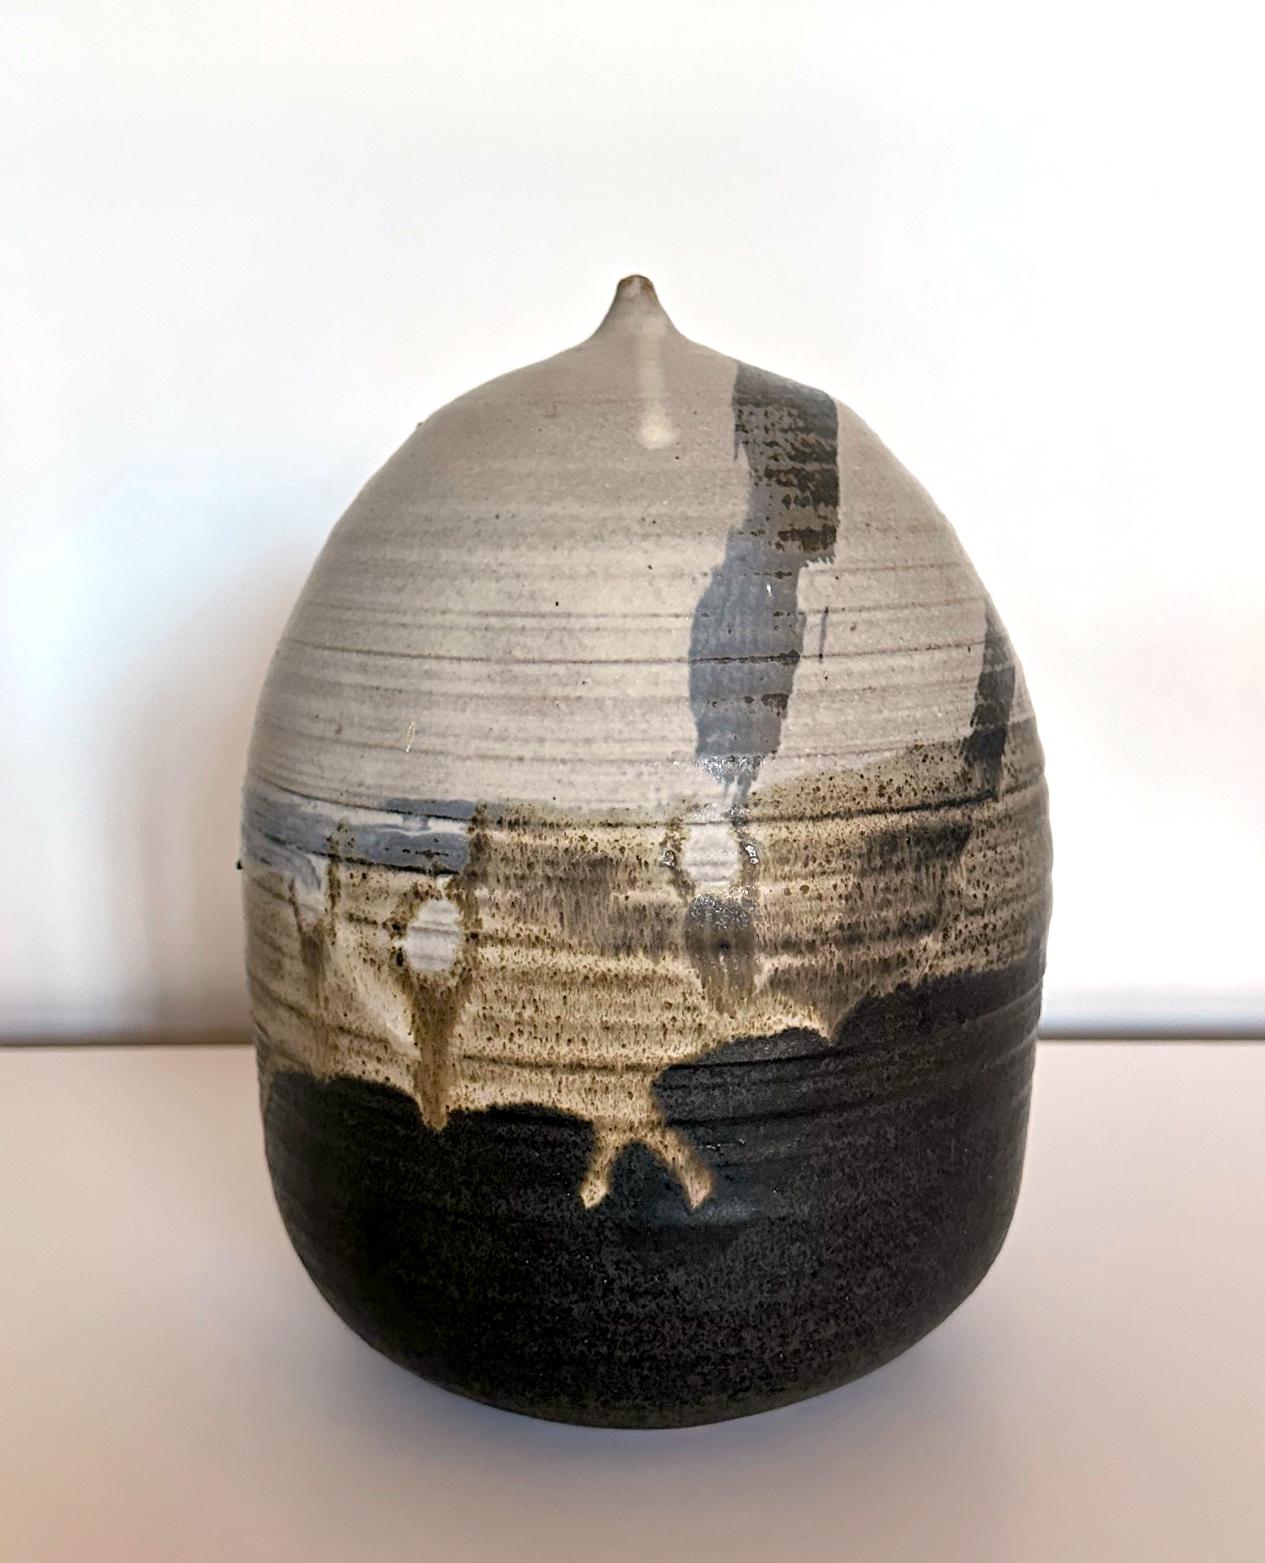 A fantastic ceramic closed-form pot with rattle by Japanese American artist Toshiko Takaezu (American, 1922 - 2011). 
The story: In the 1980s, potter Lola Rae invited Toshika to her ceramic studio and kiln in Ojai, CA to teach a class. Lola Rae had